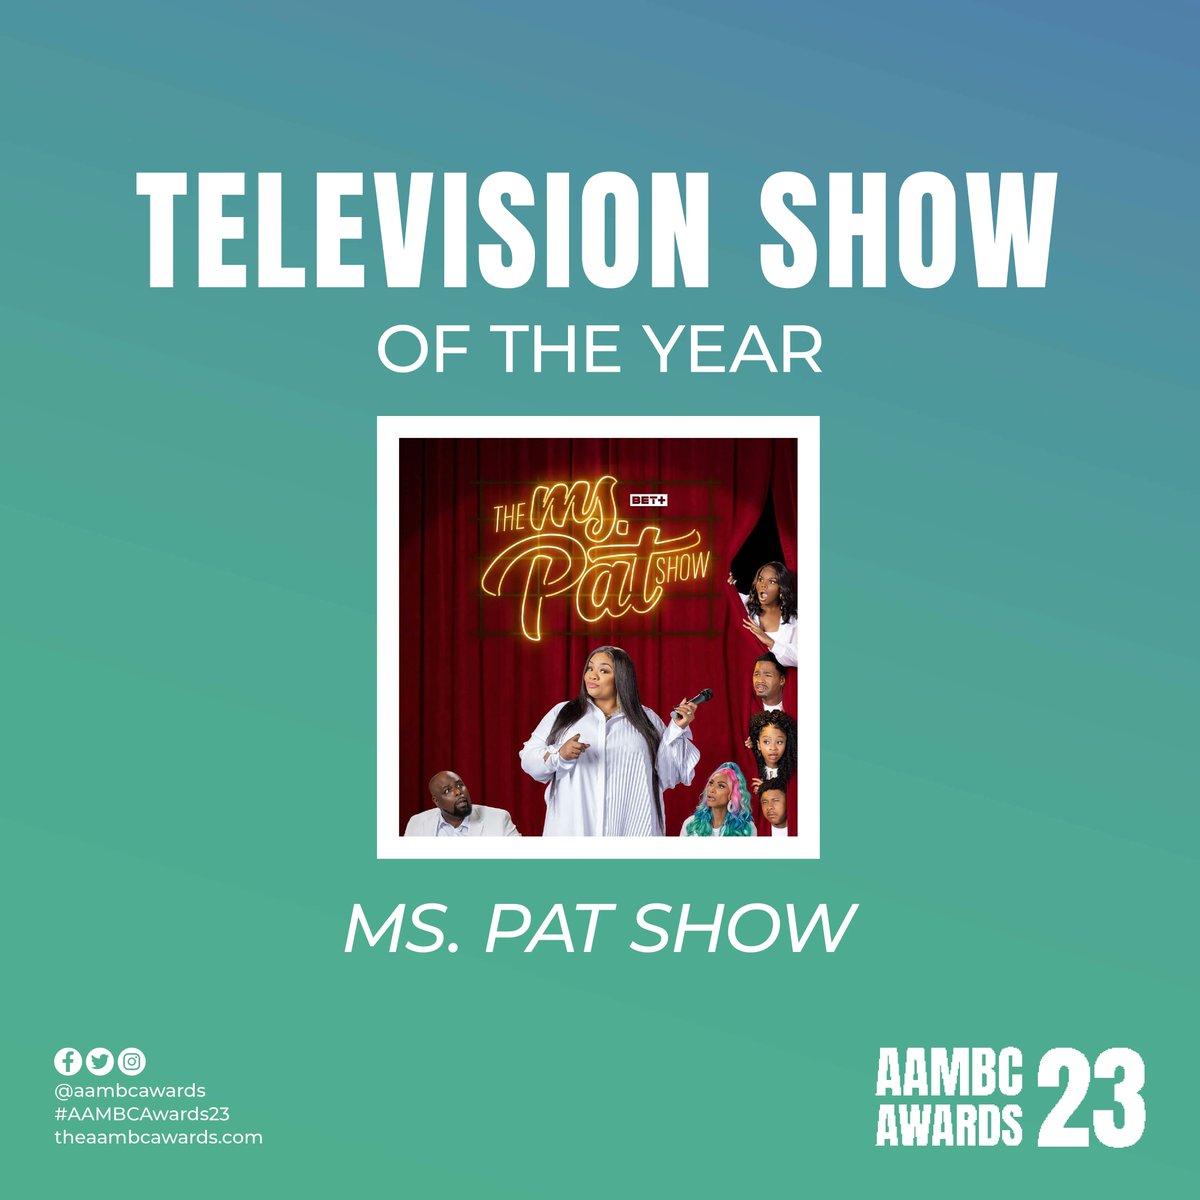 The Television Show of the Year Award goes to @comediennemspat for The Ms. Pat Show 📺 This show had us laugh, cry, and glued to the screen! Congratulations 👏🏾 #WeAreAAMBC #AAMBCAwards23 #MsPatShow